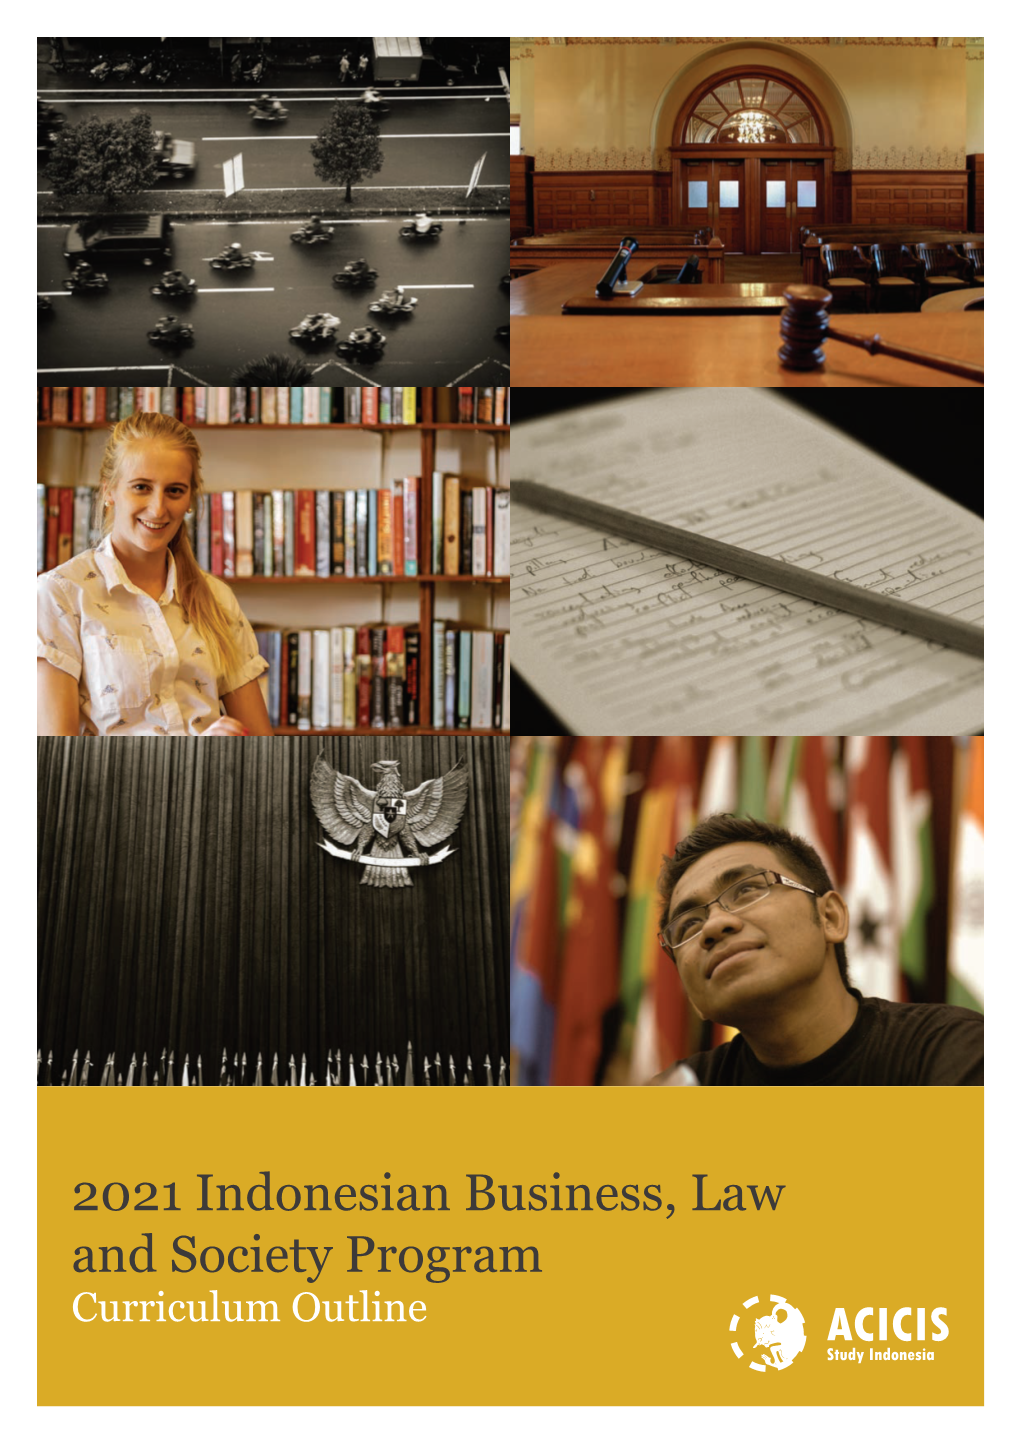 2021 Indonesian Business, Law and Society Program Curriculum Outline